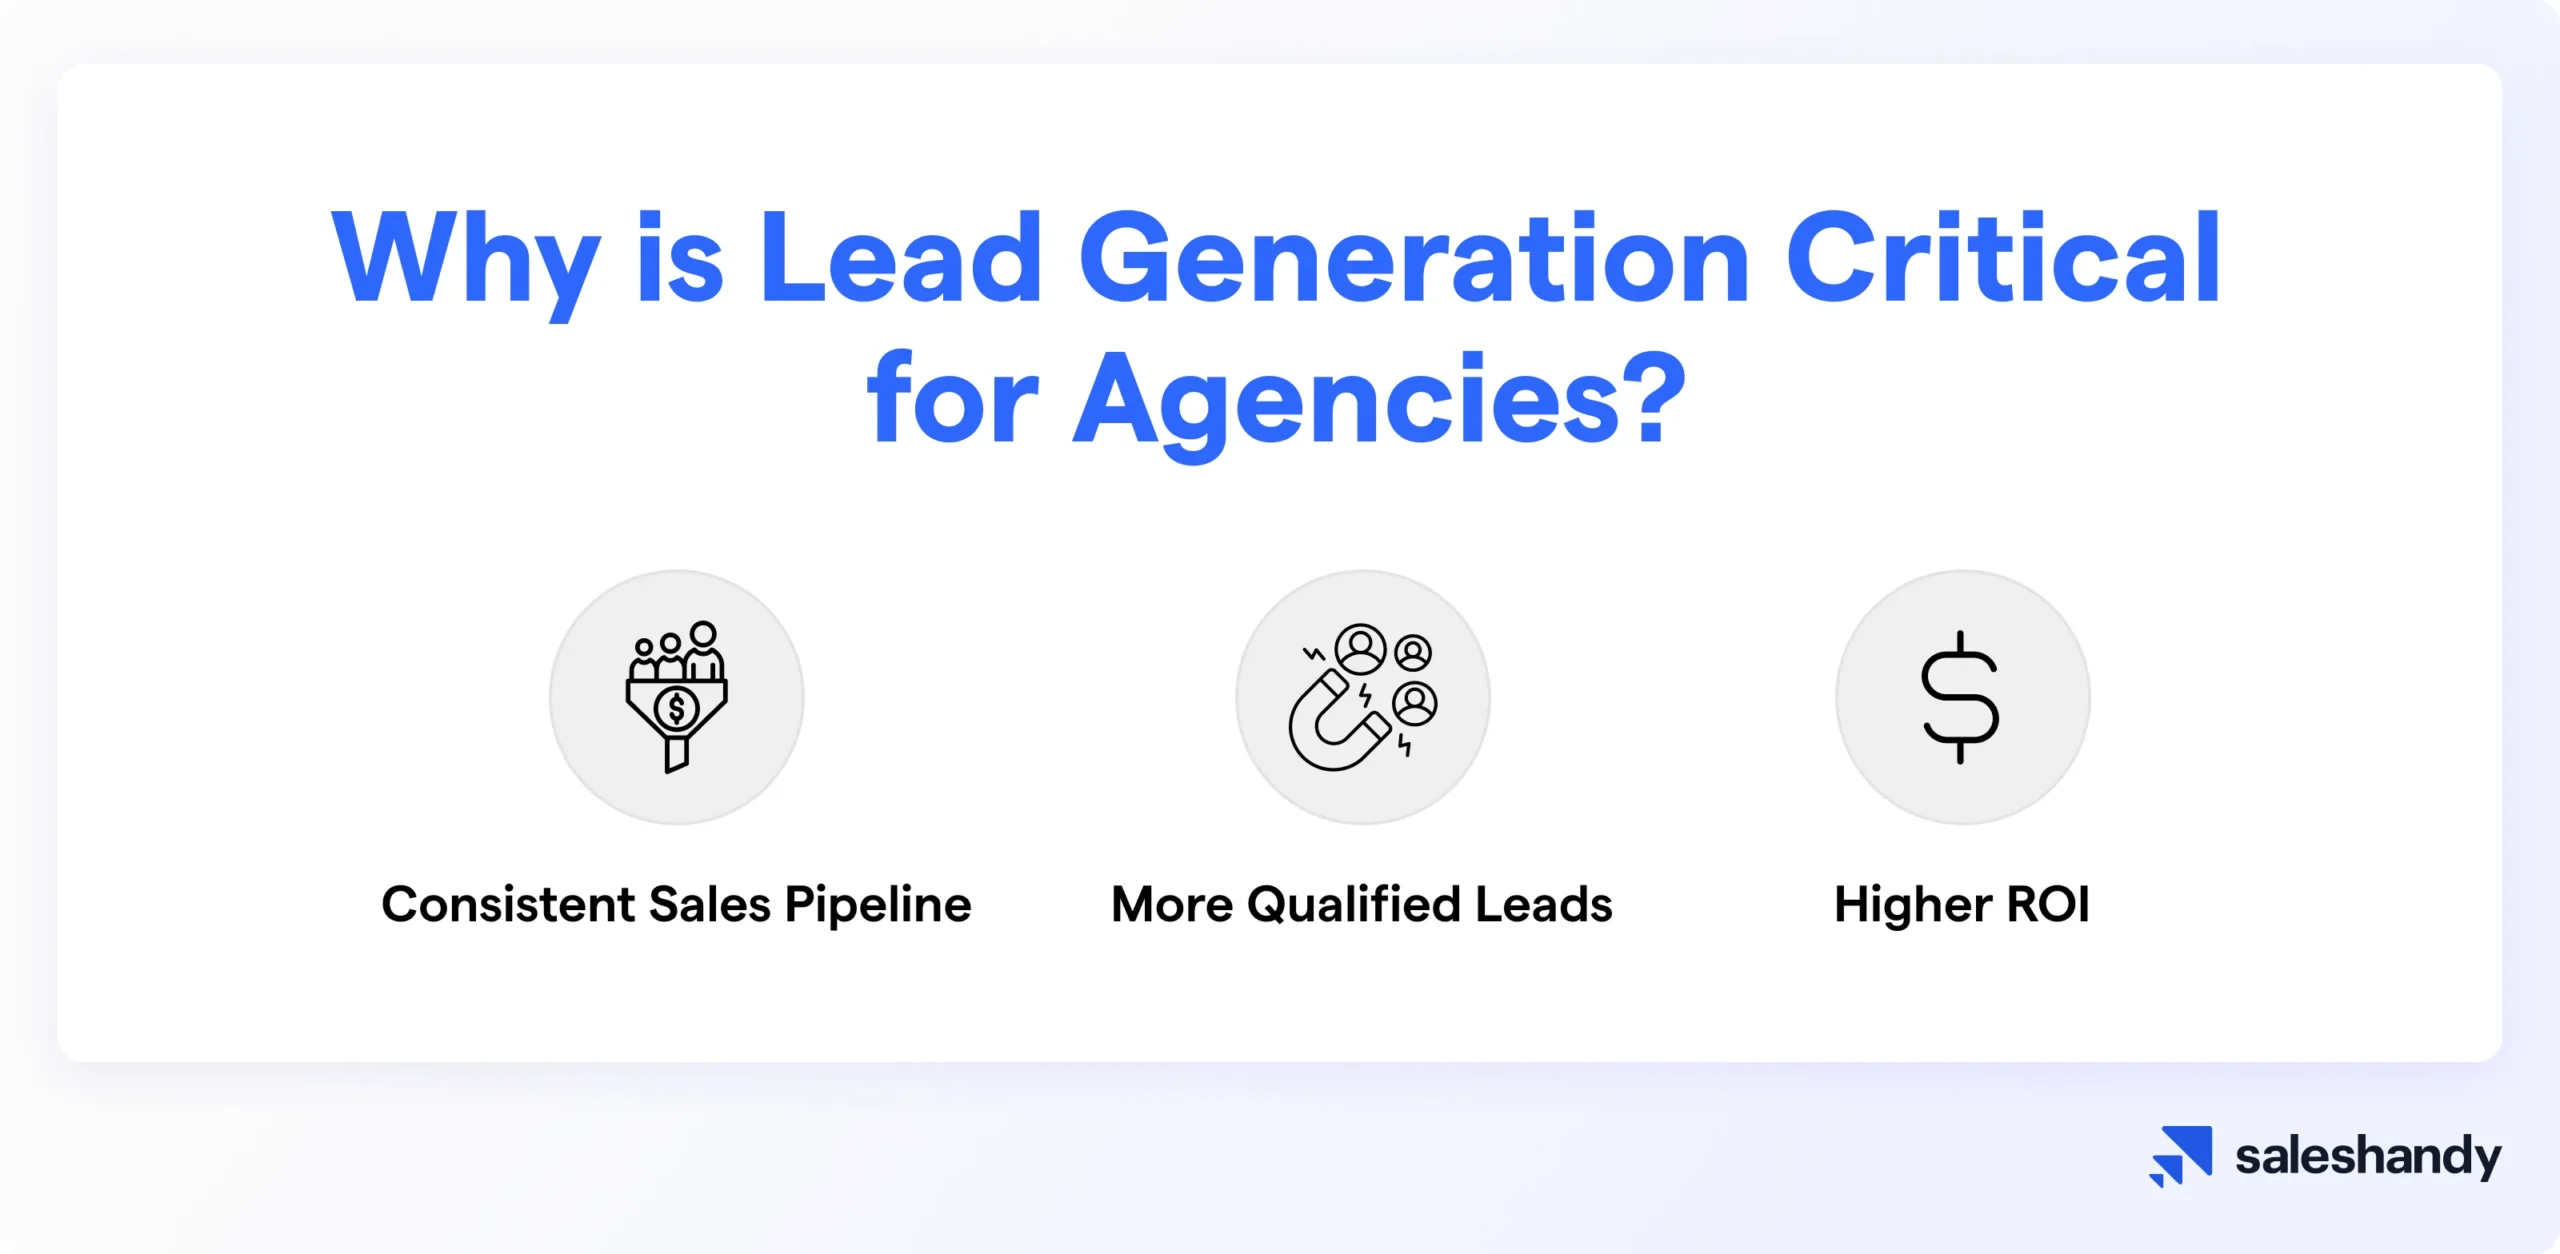 Lead Generation is important for an agencies growth